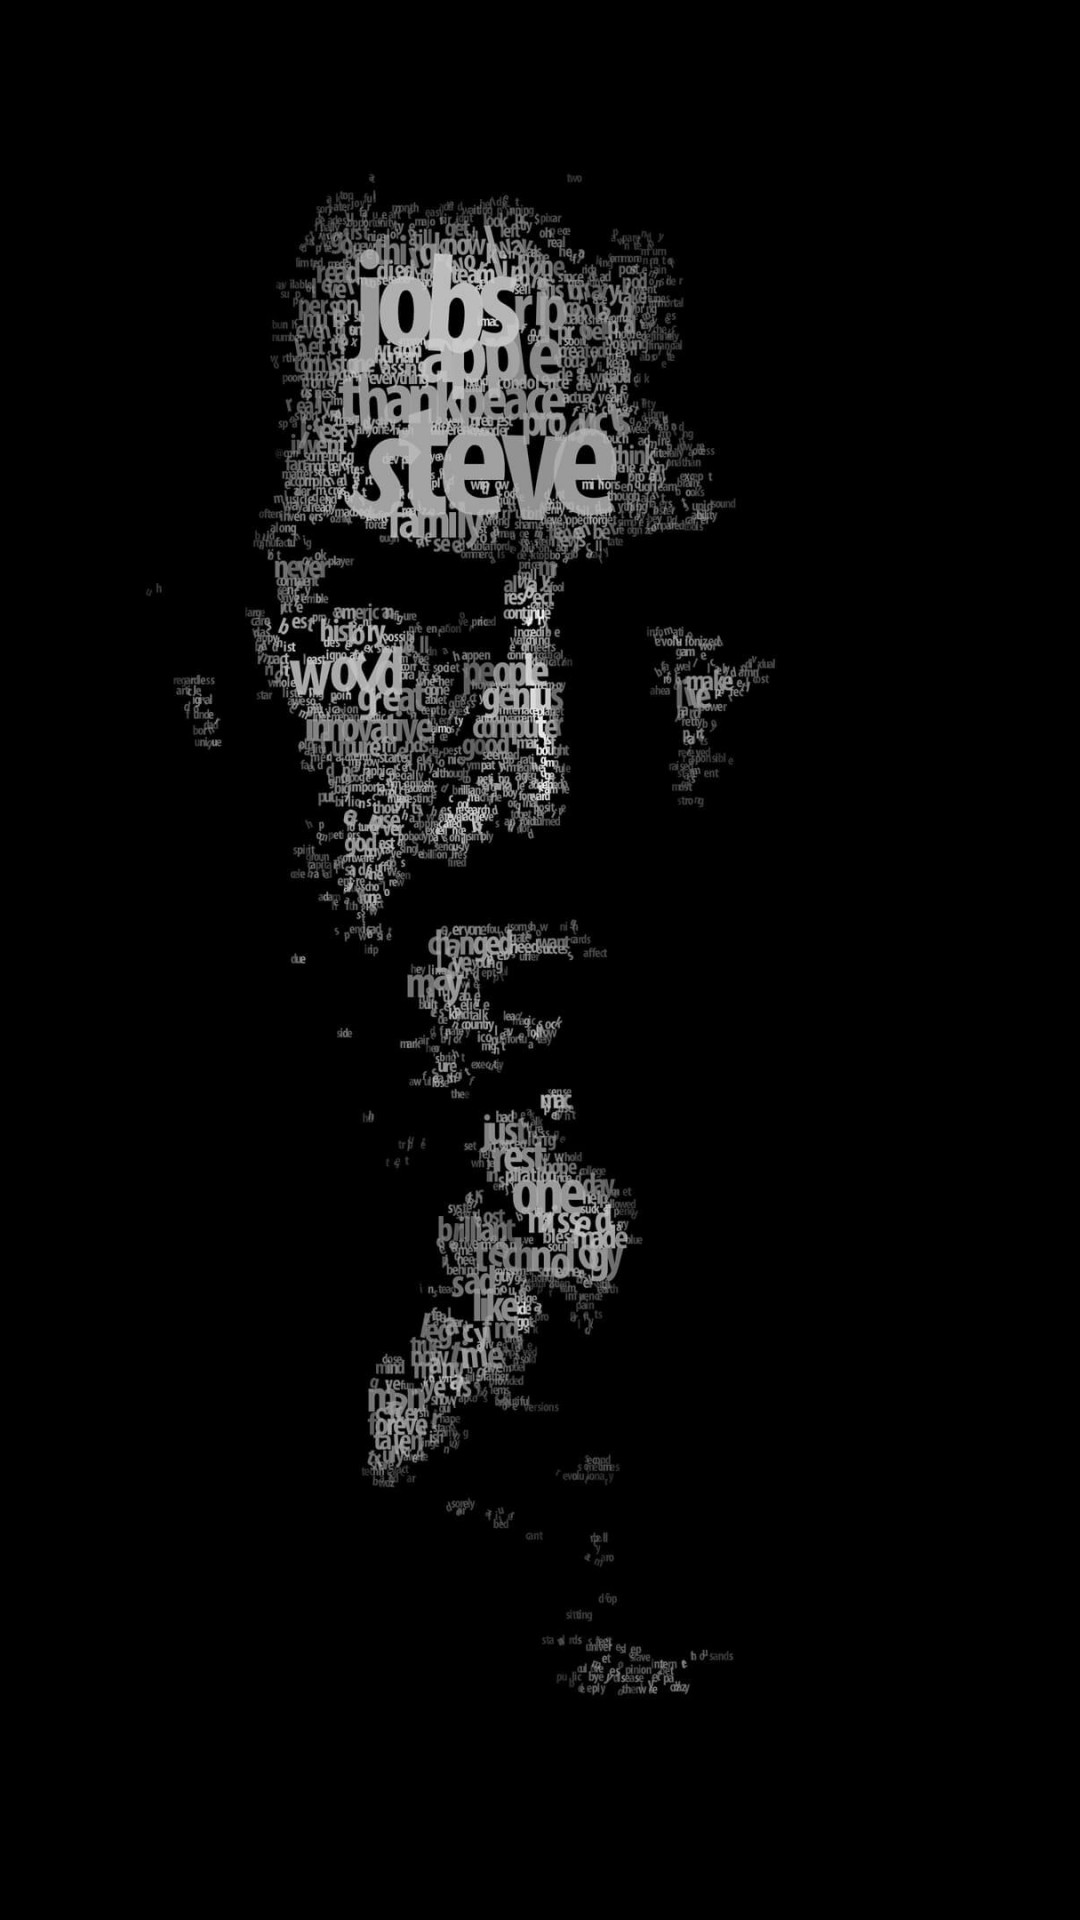 Typeface Portrait of Steve Jobs Wallpaper for SAMSUNG Galaxy Note 3